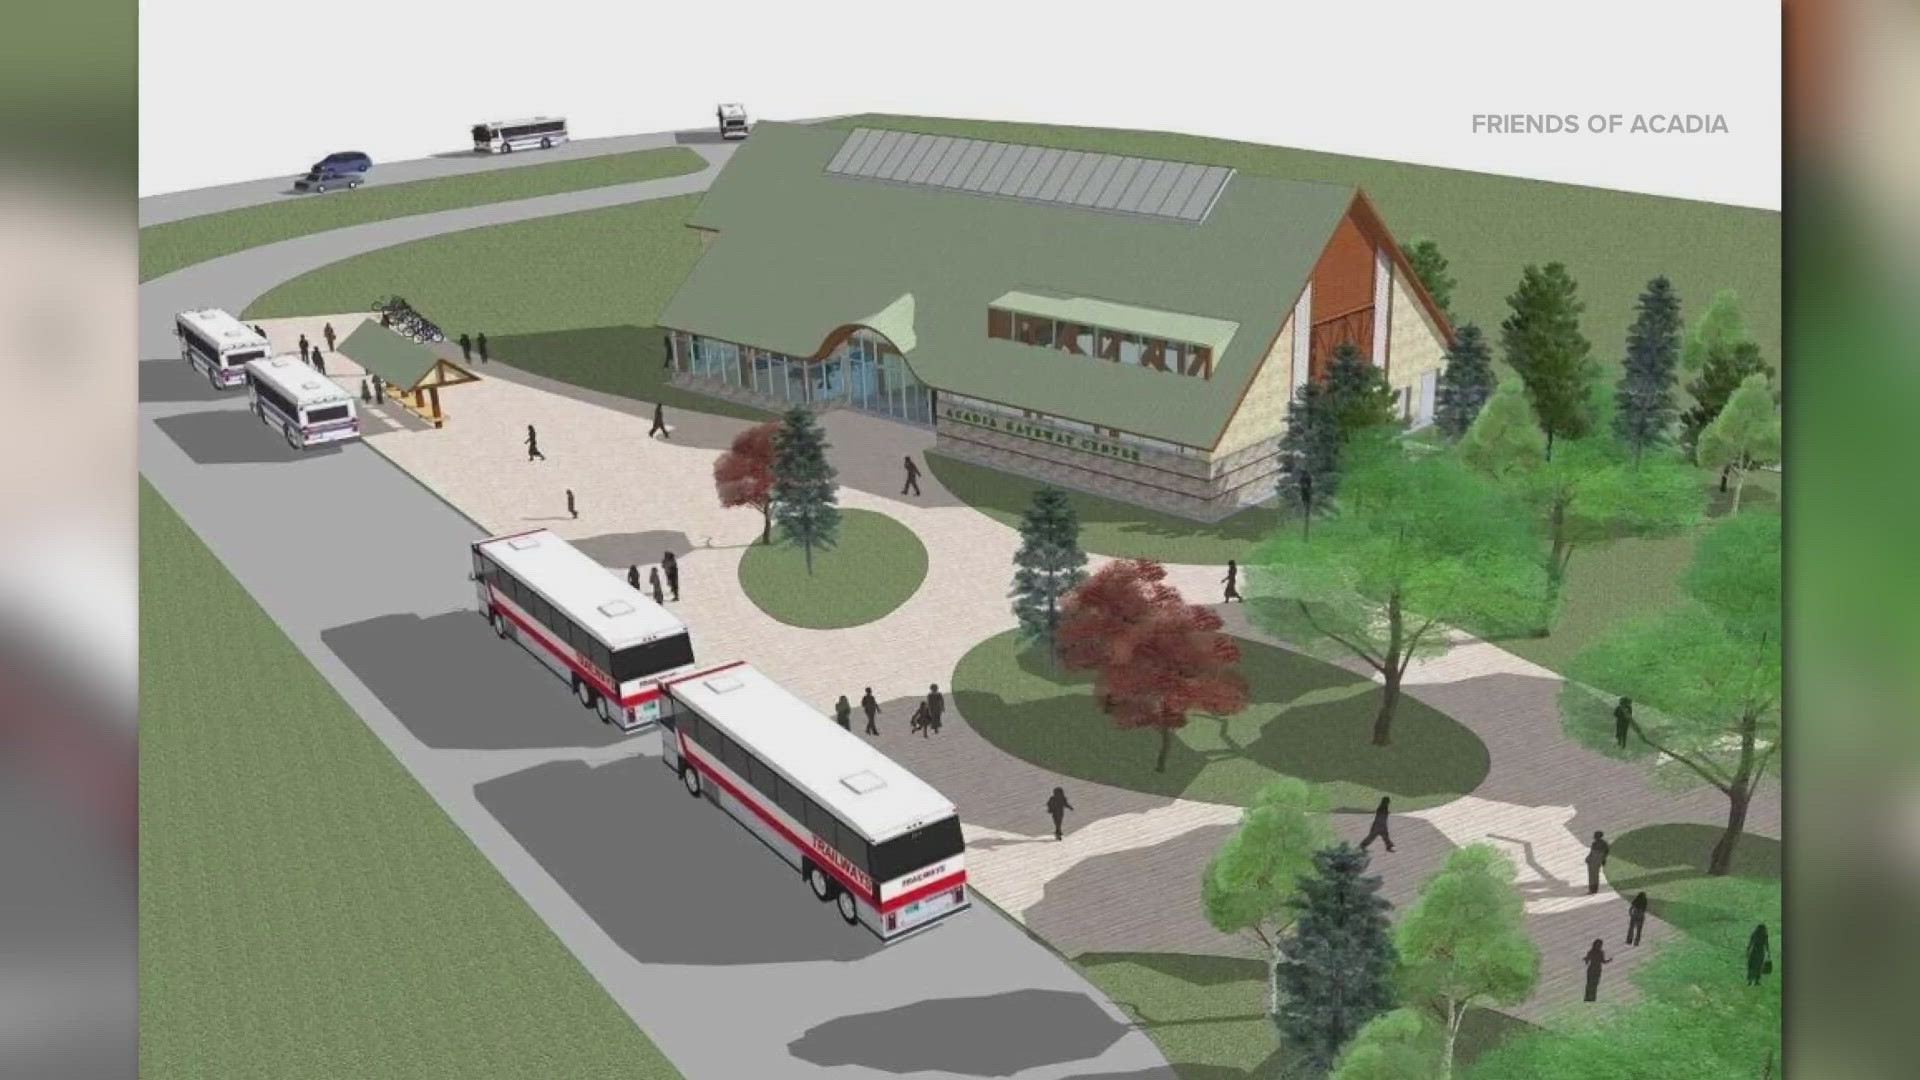 The transit hub is being seen as an answer by some  to Acadia National Park's traffic woes.